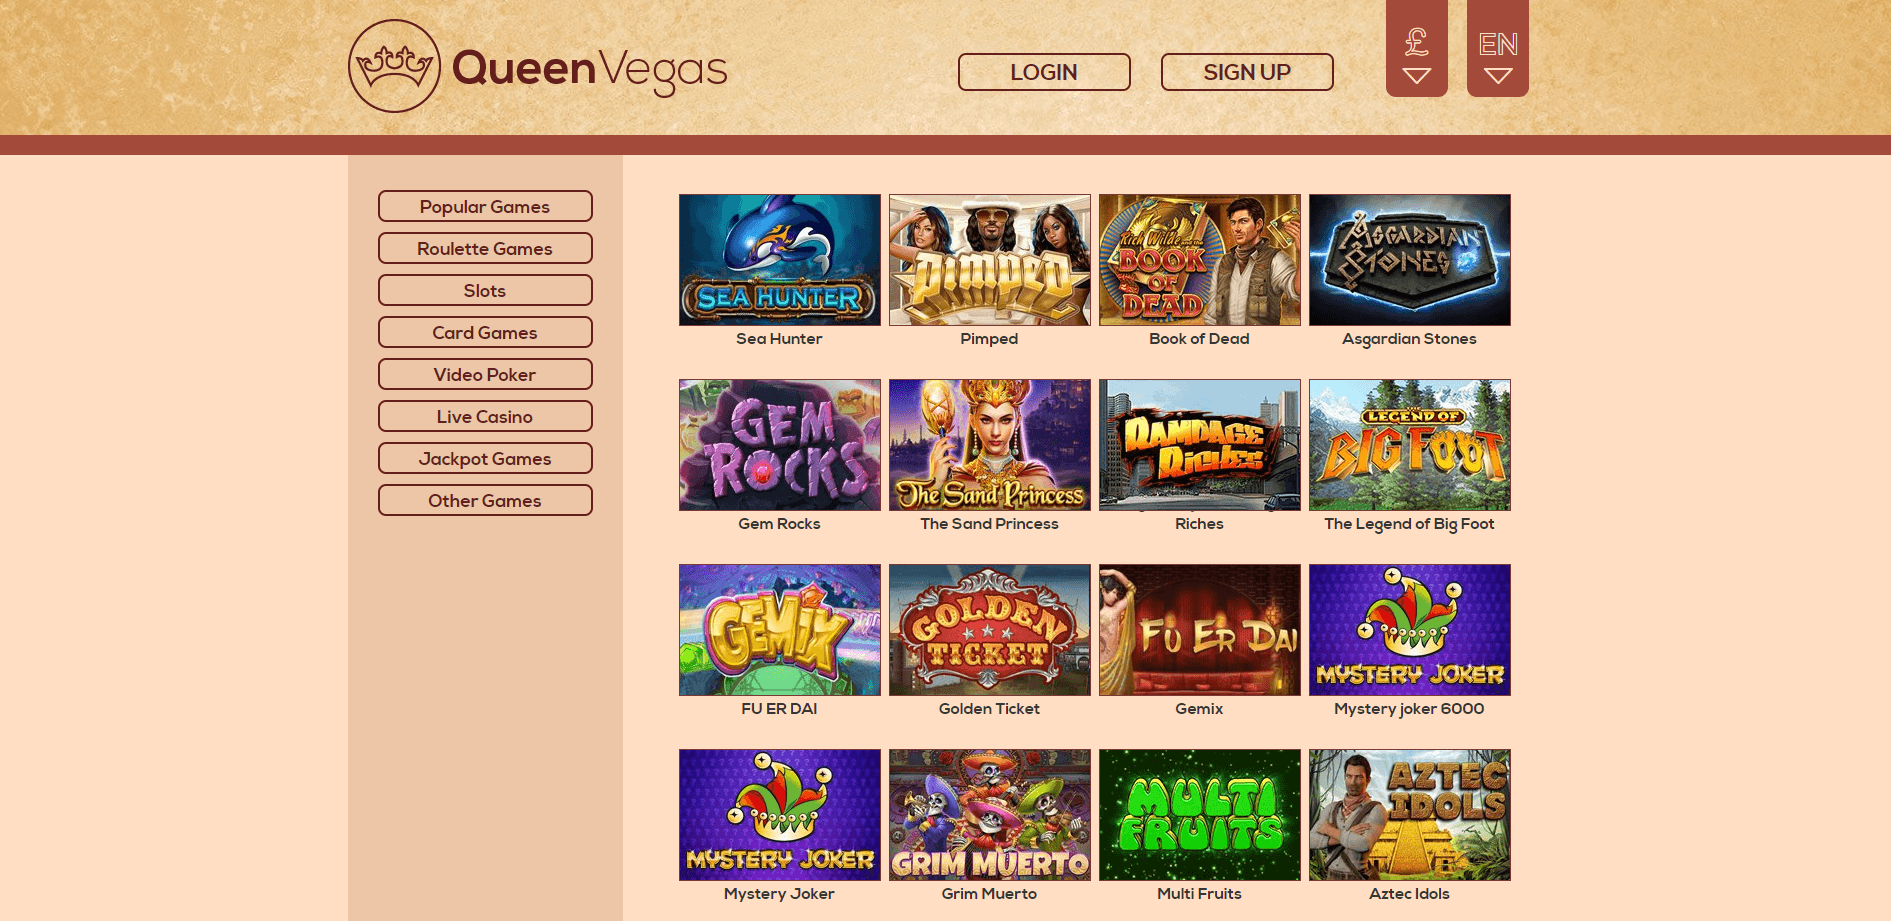 A screenshot of the Queen Vegas casino games page with slots game thumbnails